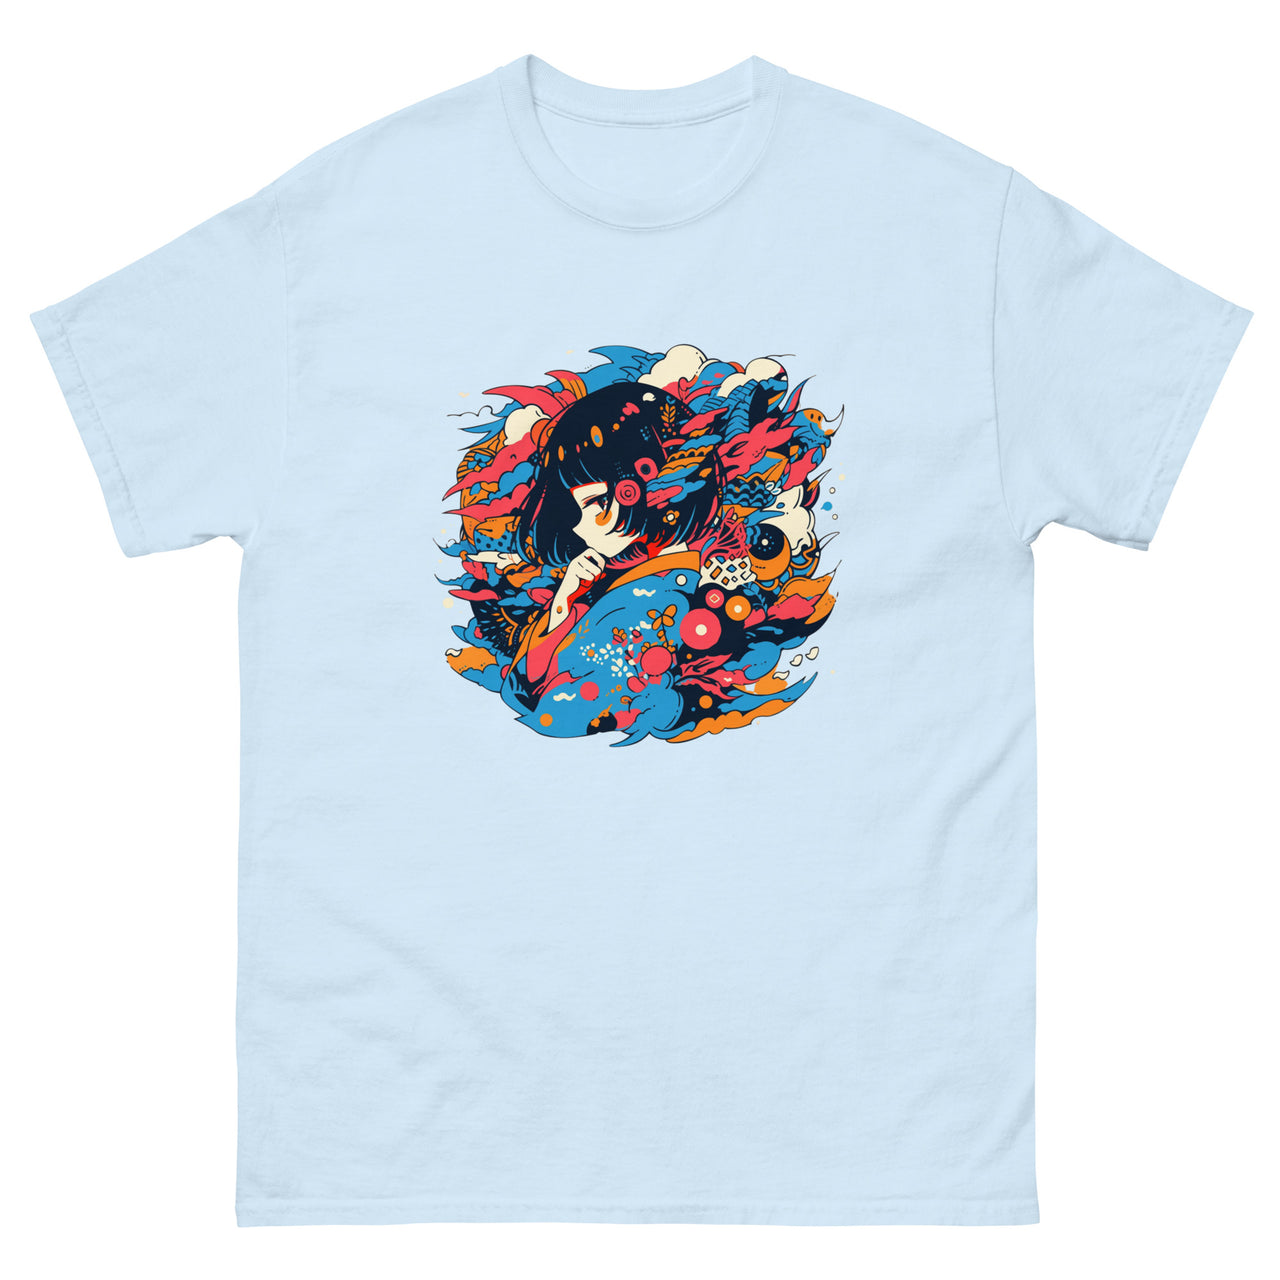 Lost in Thoughtful Contemplation Short-Sleeve Unisex T-Shirt